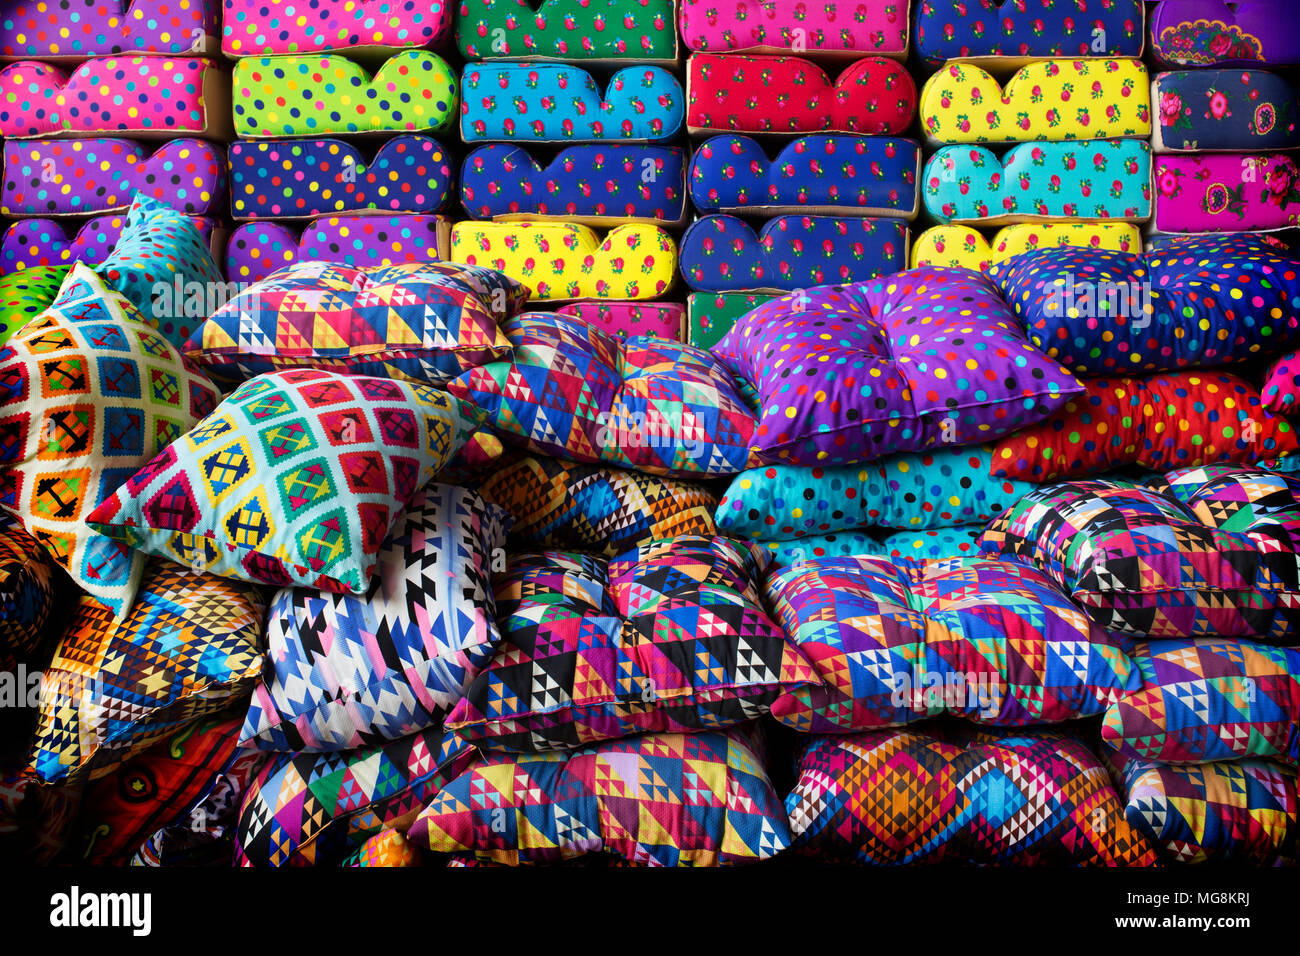 Colourful cushions in a market, Kuwait Stock Photo